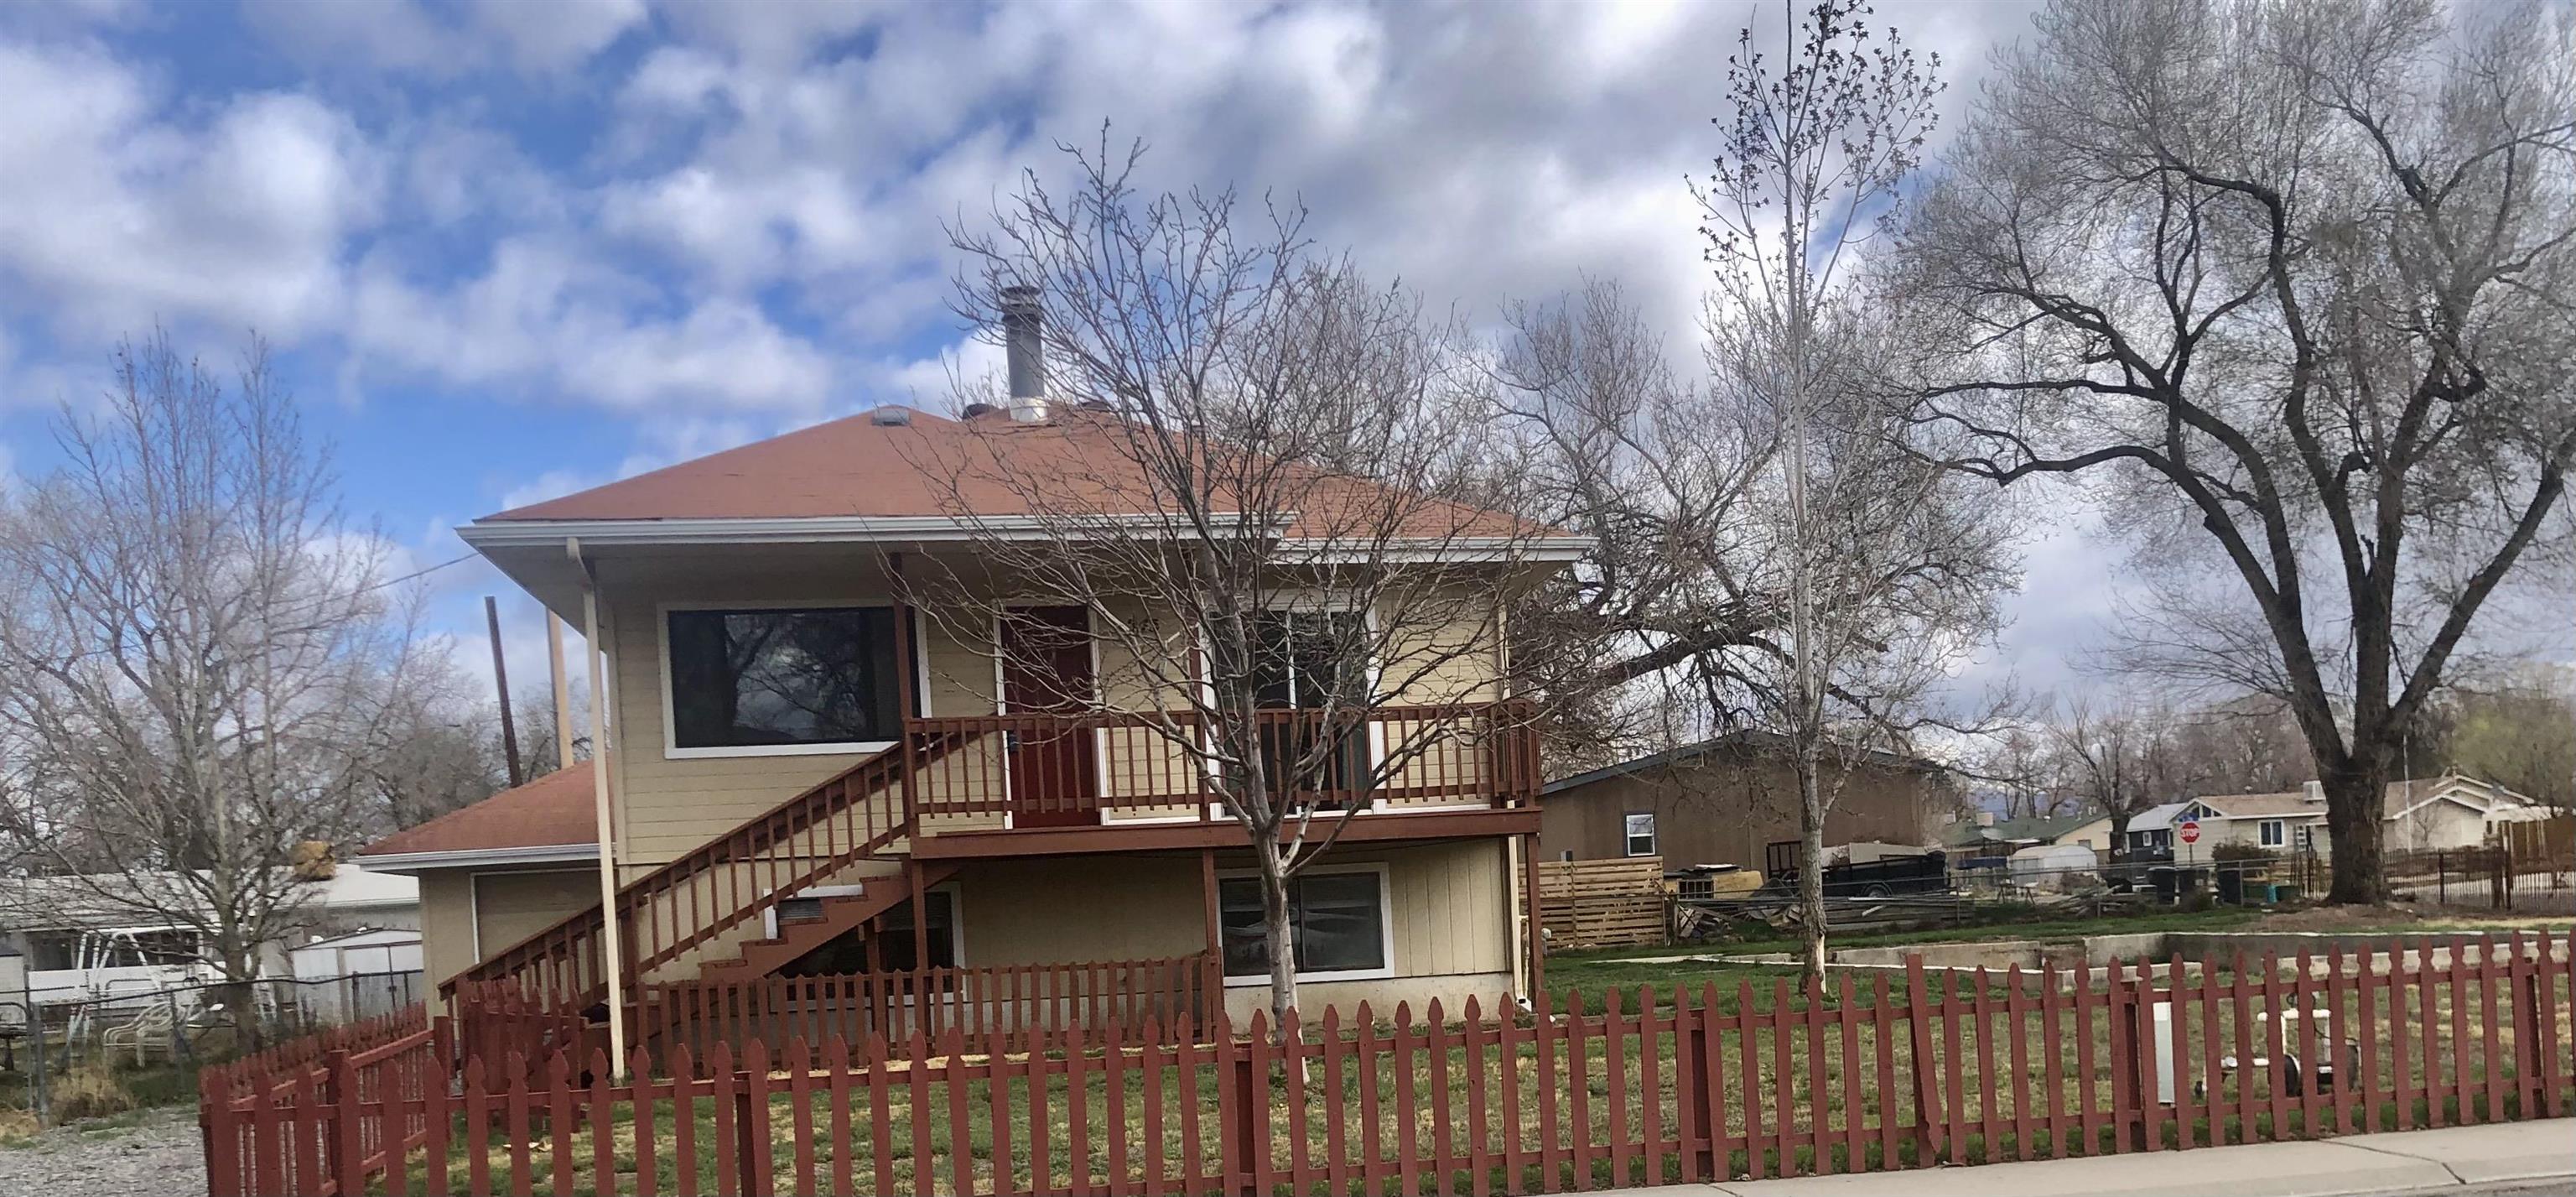 New carpet and paint in this unique home in the heart of Fruita.  Home features 3 living areas or possible bedroom options. All of this is nestled on a large corner lot with lots of possibilities. Foundation in place for prospective shop, mother-in-law set up, or VRBO.